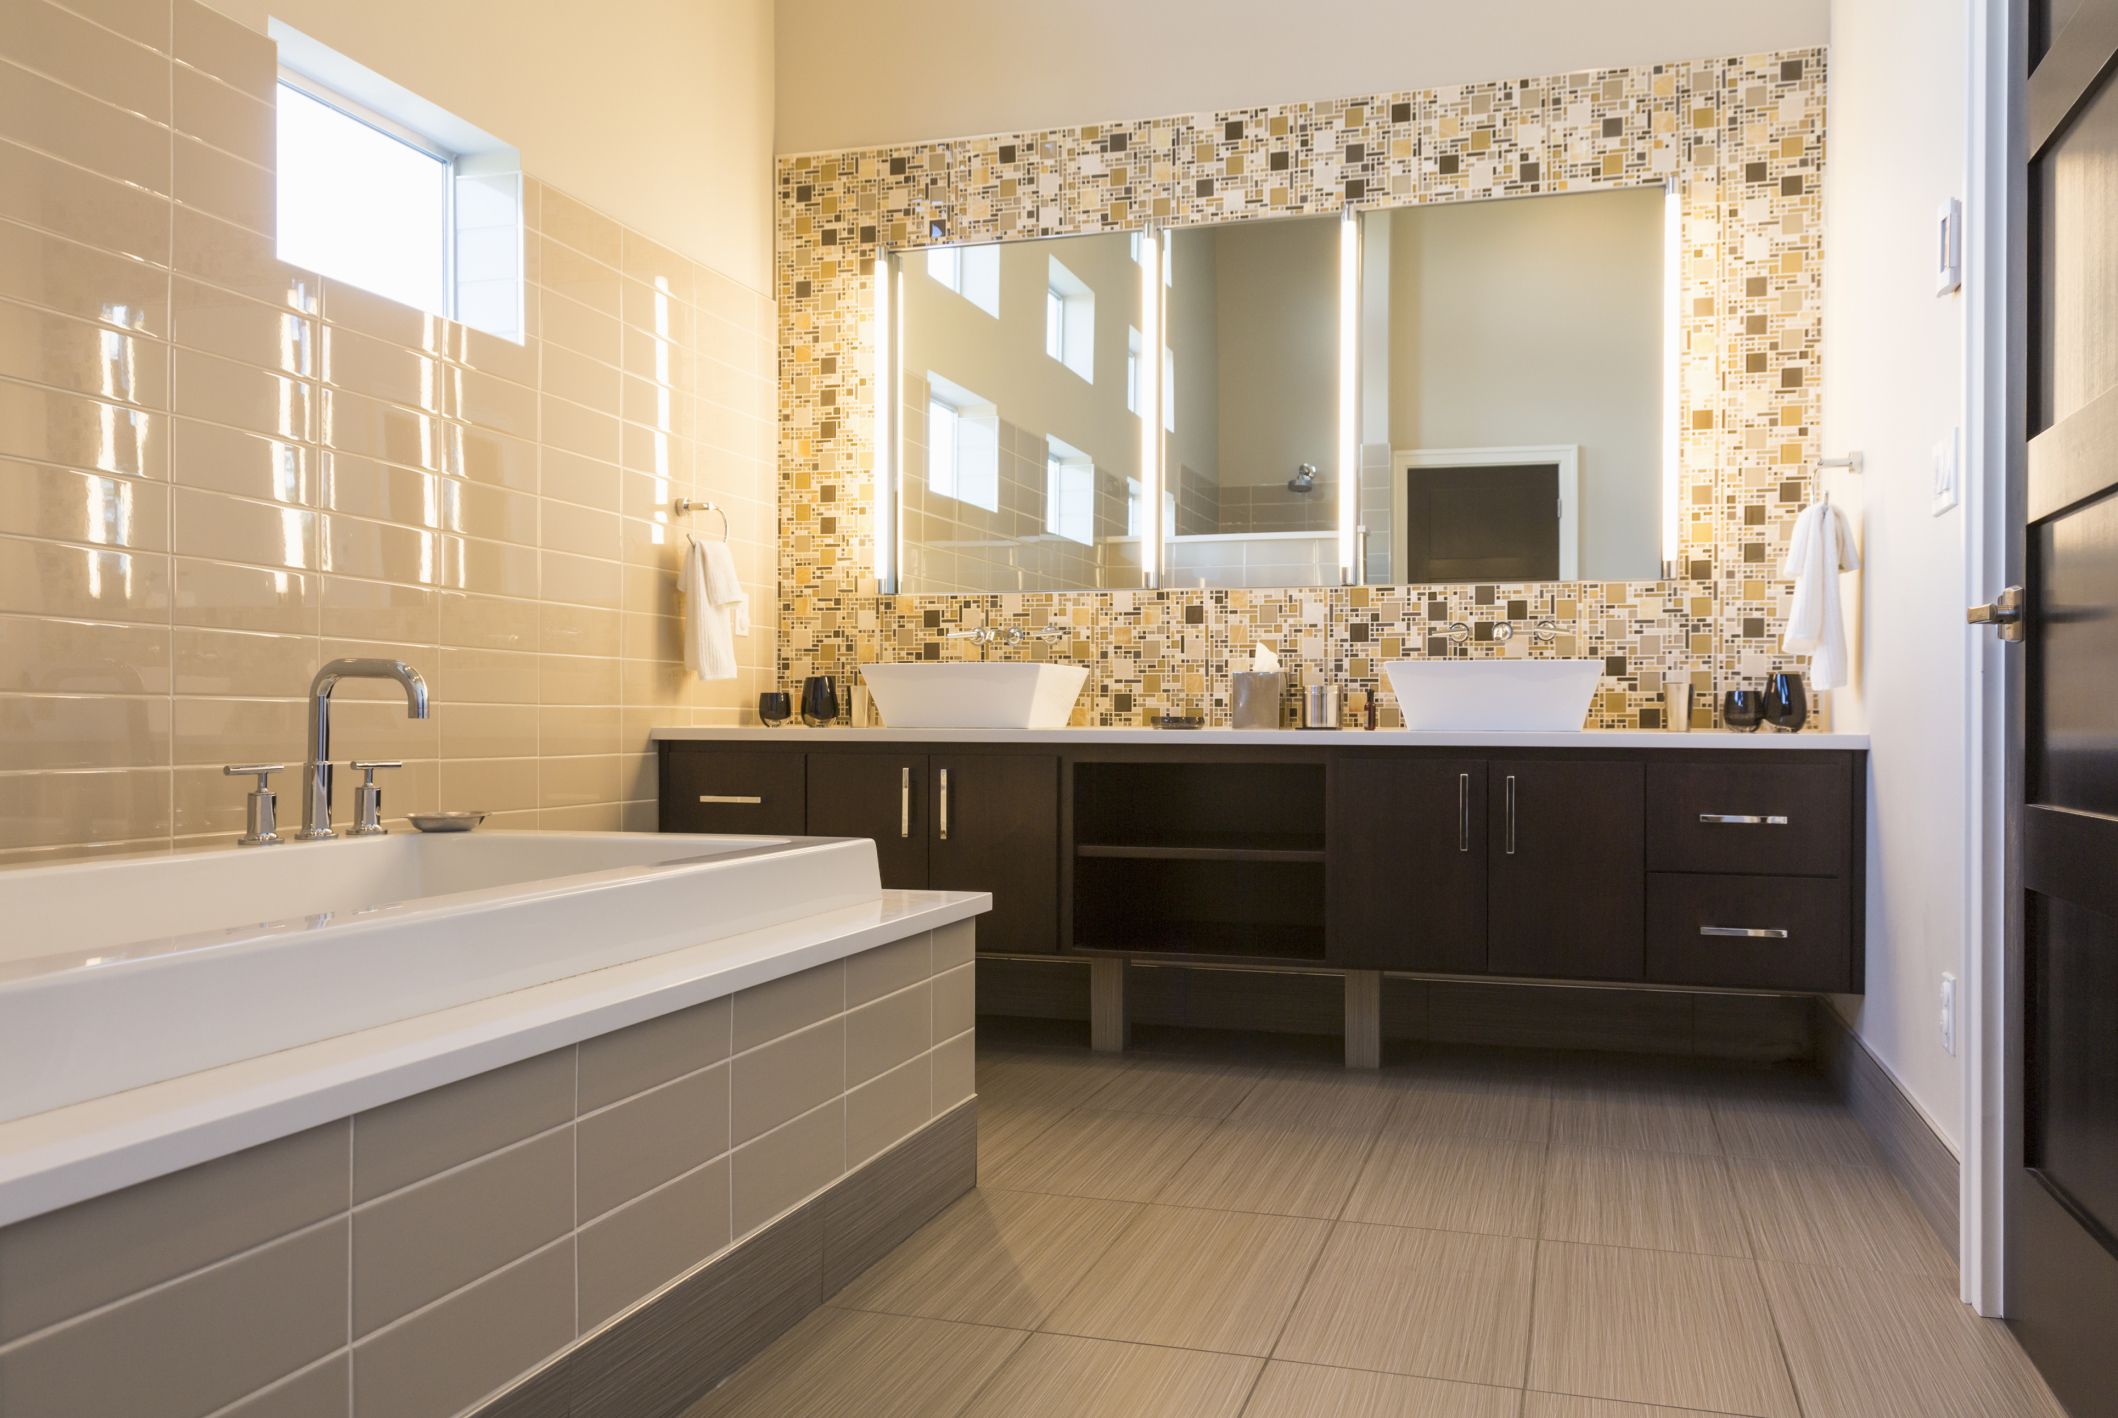 How to remodel a bathroom yourself